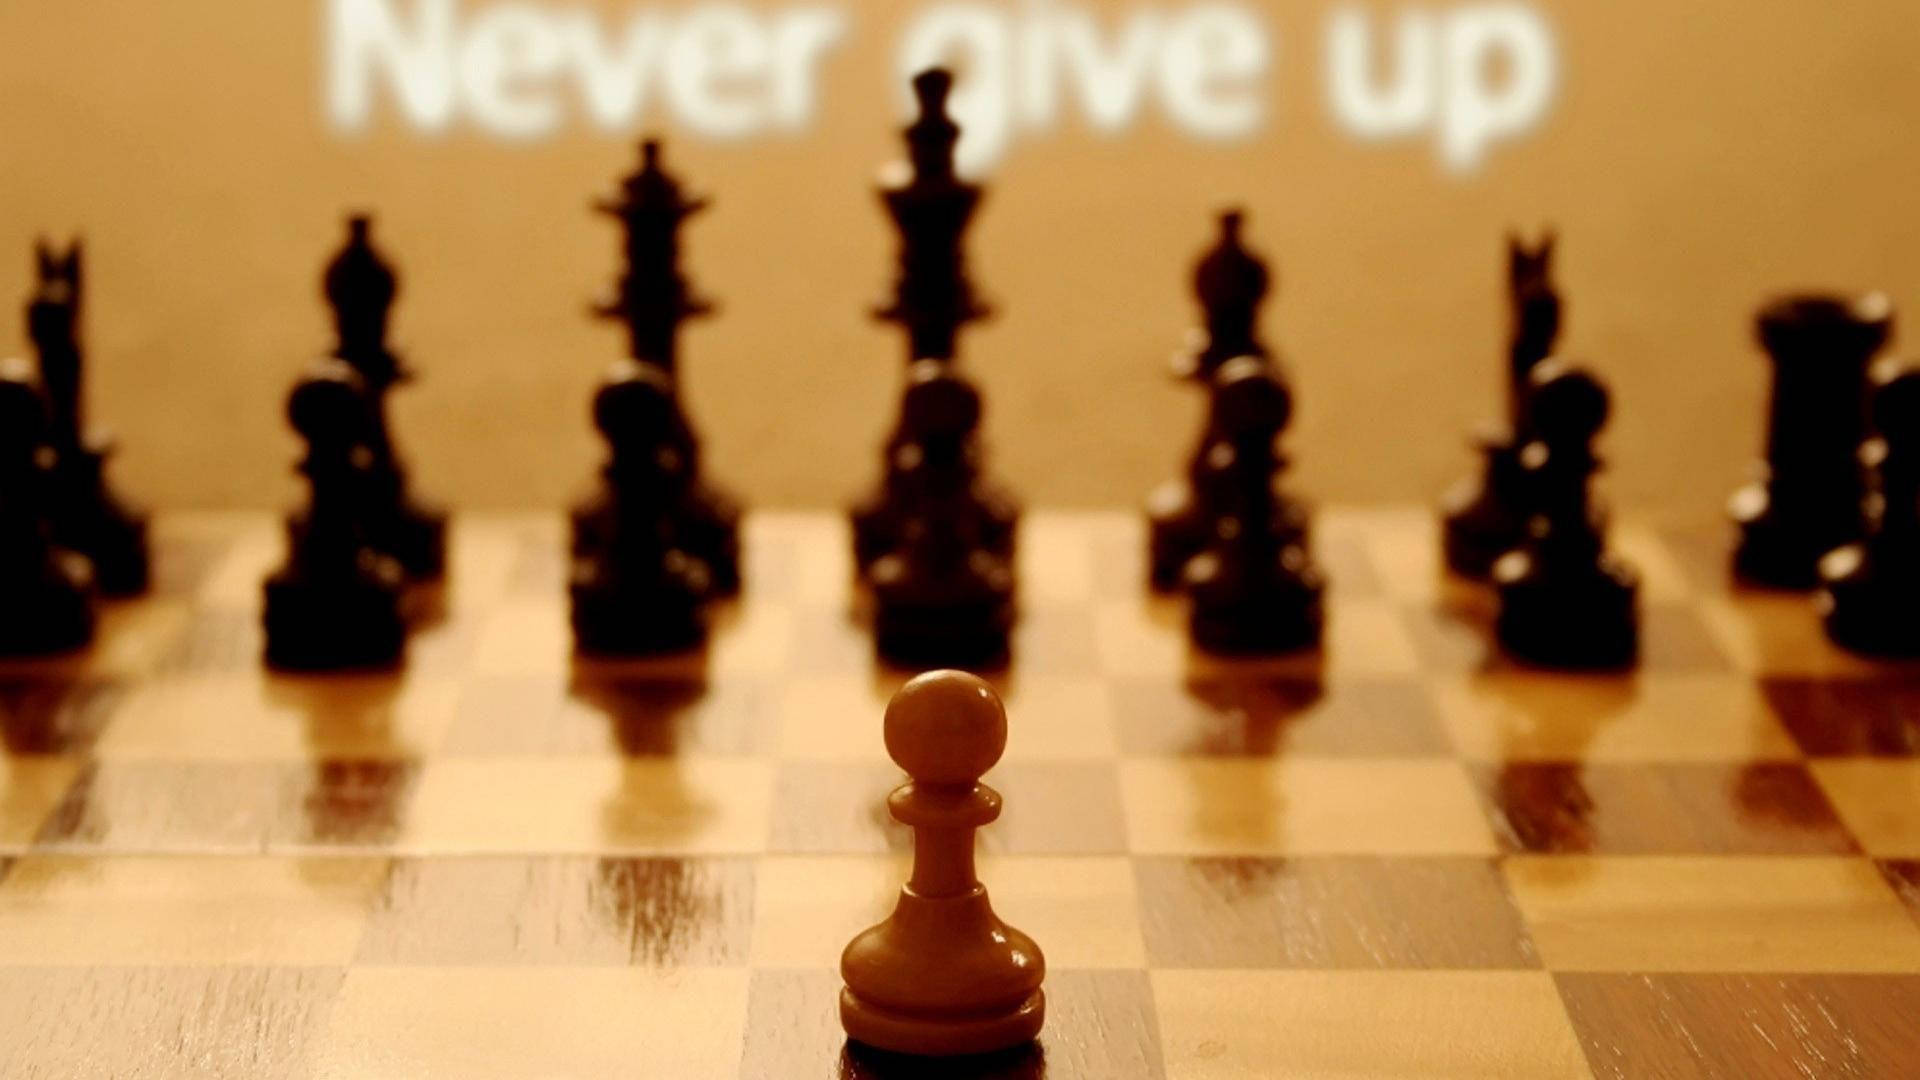 "The Ultimate Triumph - The Resilience of a Chess Player" Wallpaper